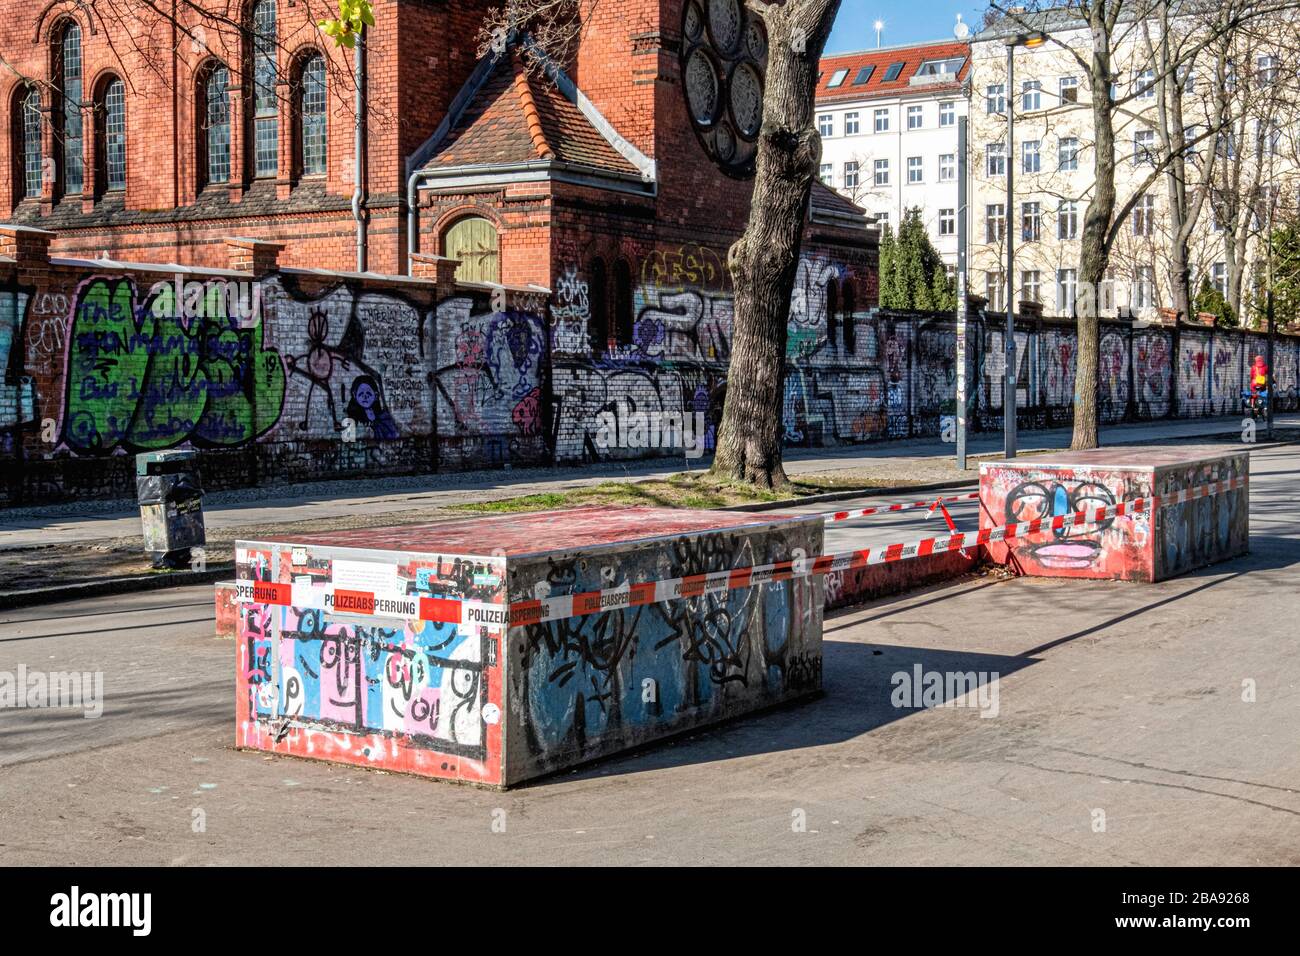 Skate Boarding area closed with Poilice tape. Streets & pavements are empty  due to Coronovirus Pandemic, Mitte, Berlin, Germany Stock Photo